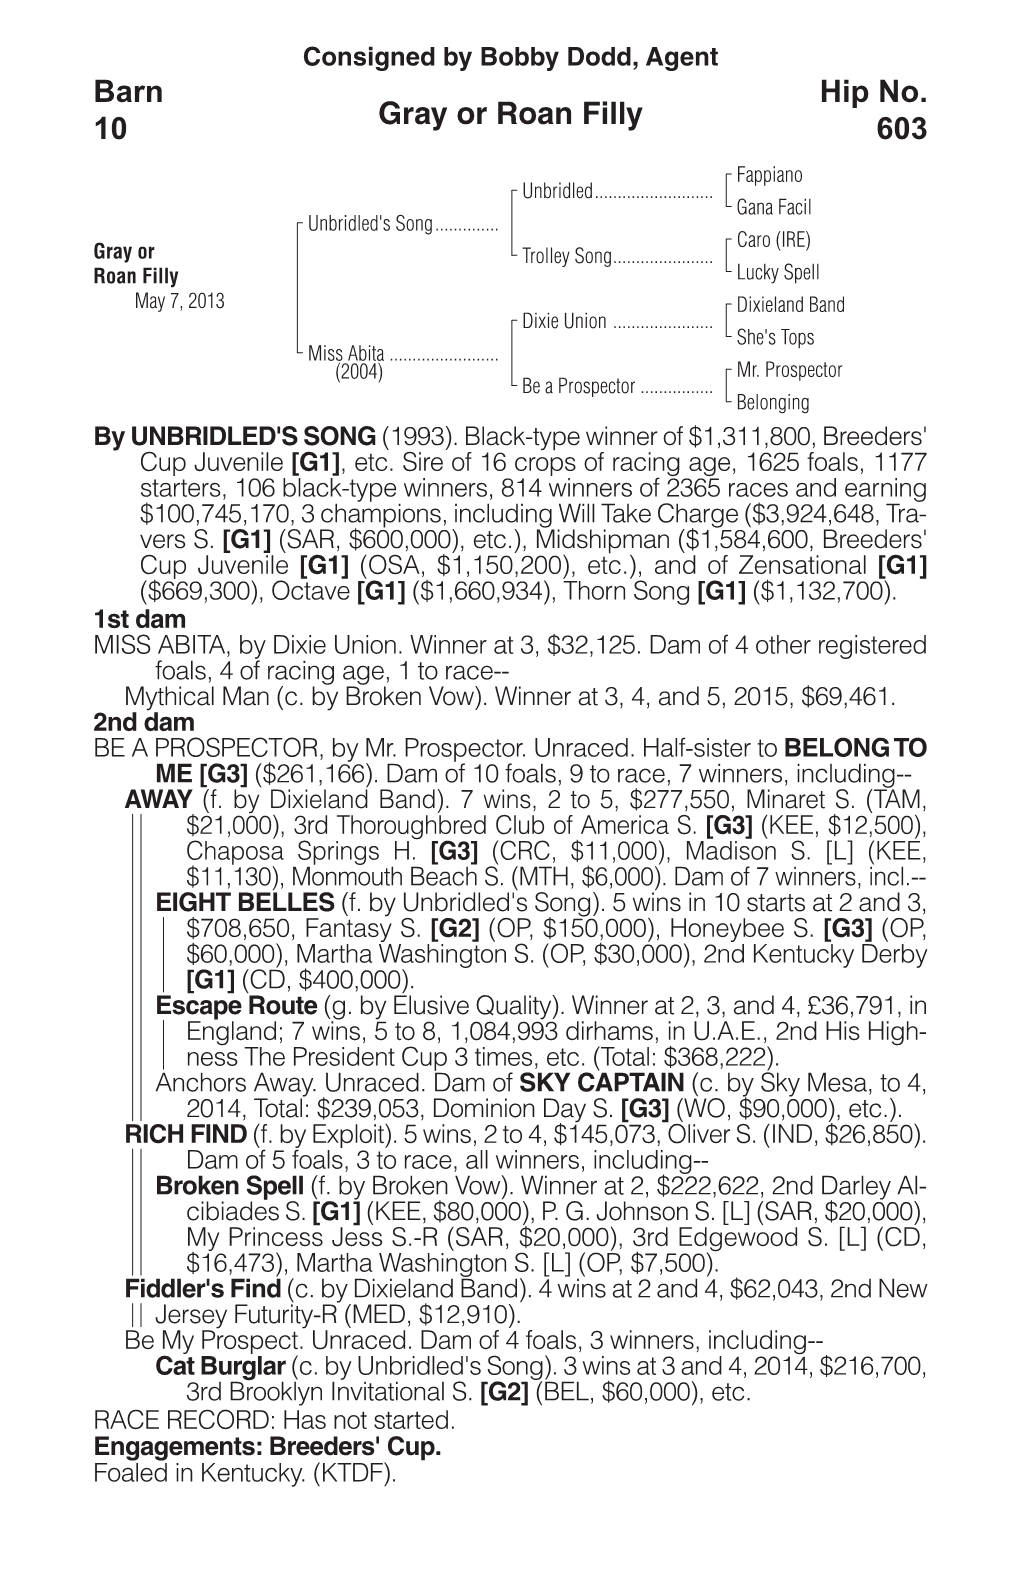 Gray Or Roan Filly Barn 10 Hip No